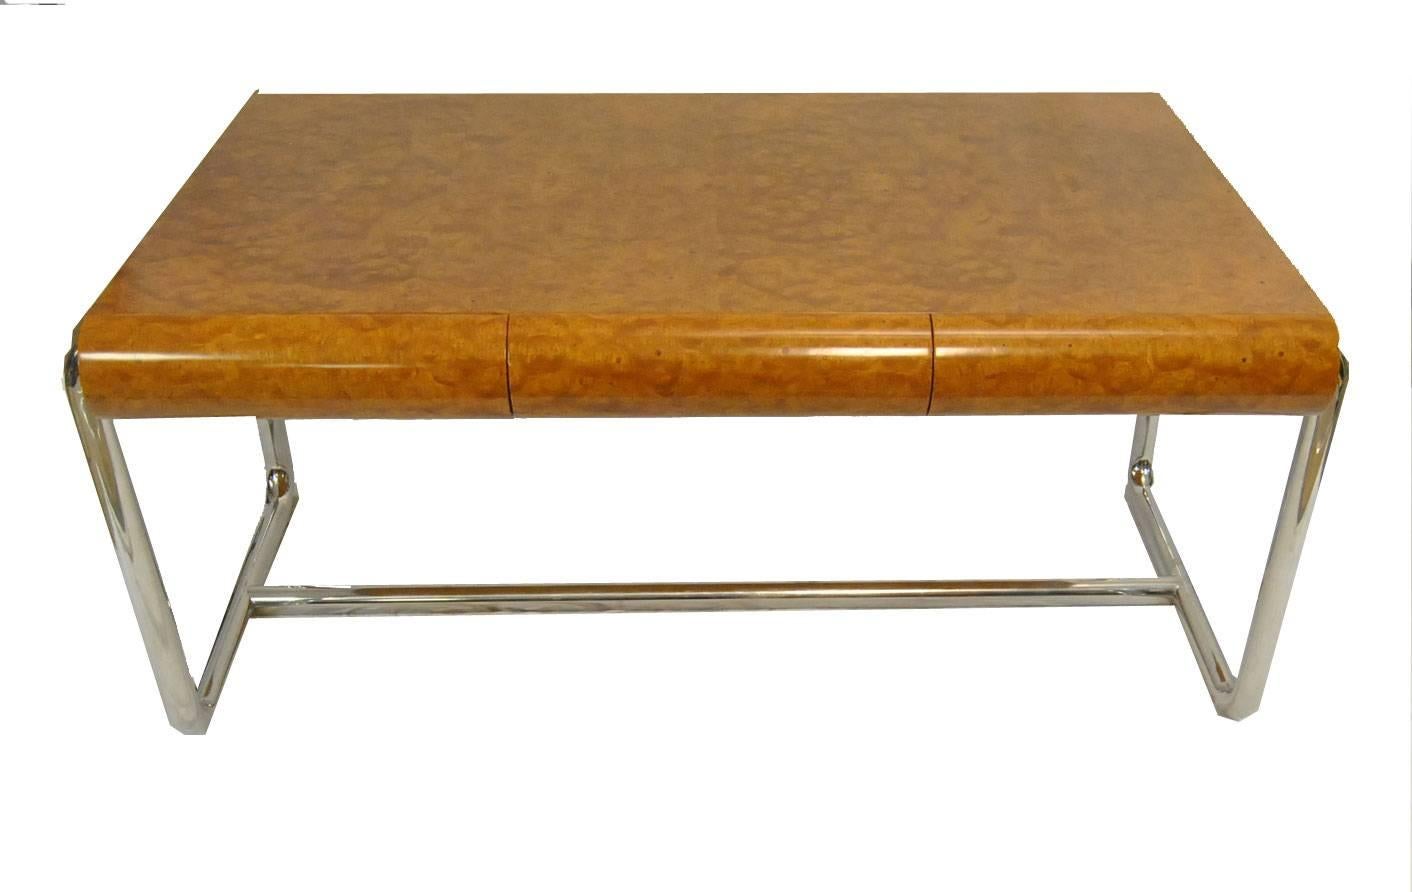 A great Mid-Century Modern burled wood desk designed by Leon Rosen for the Pace Collection. This desk features three curved drawers that blend in with the overall clean design. 2" curved tubular chrome-plated legs with central support hold the